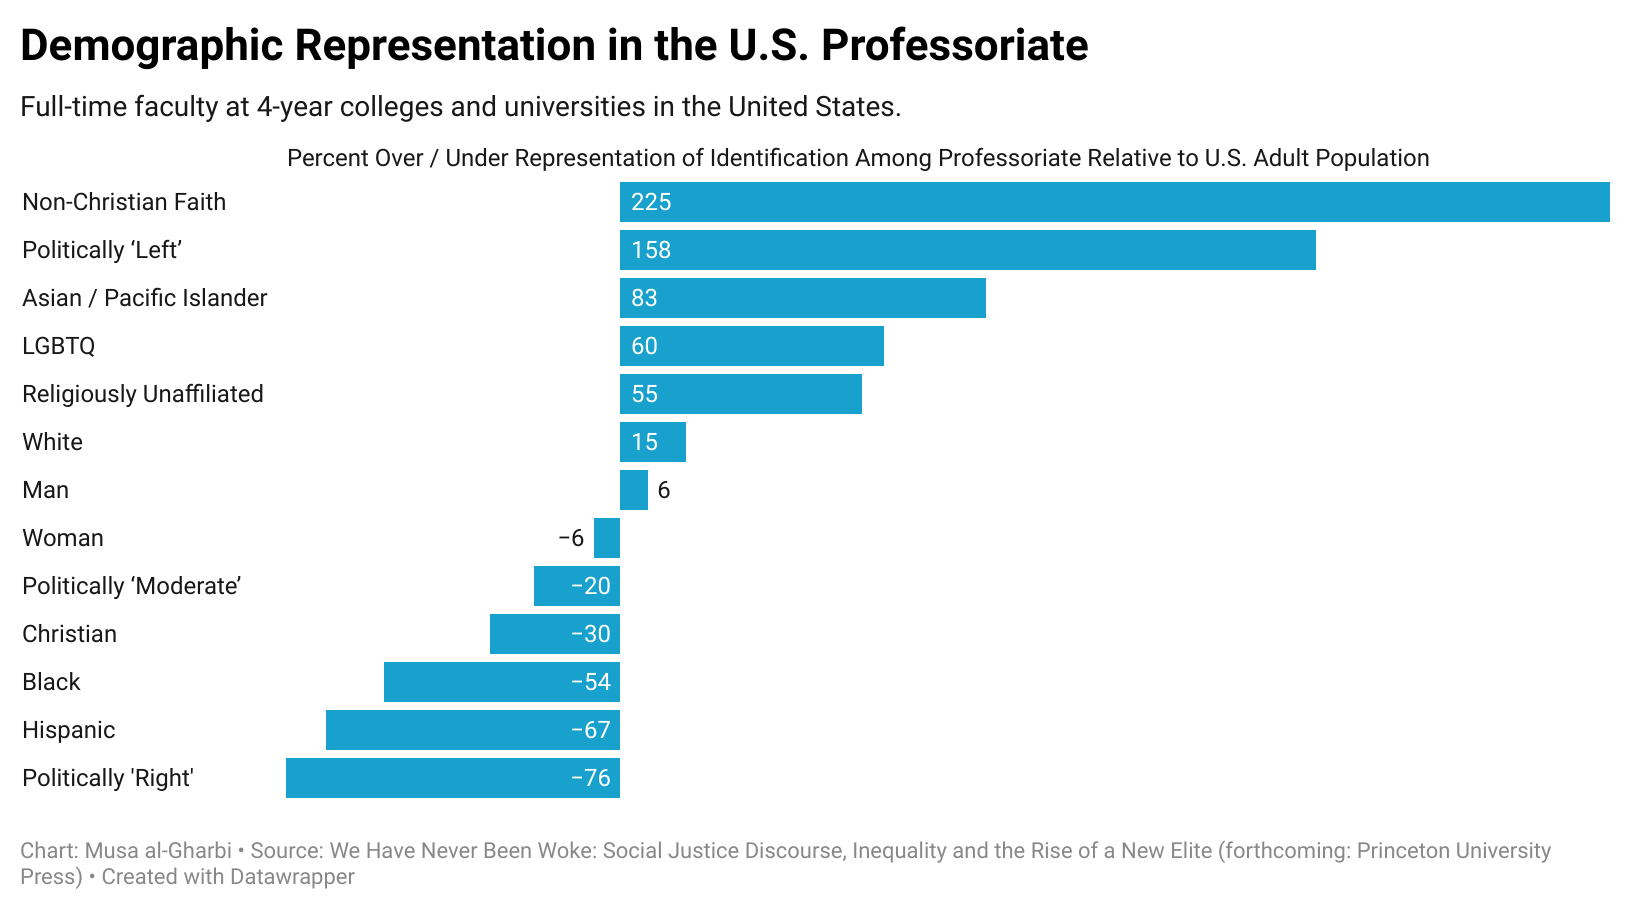 U.S. College Professors Do Not Well-Represent the Rest of America